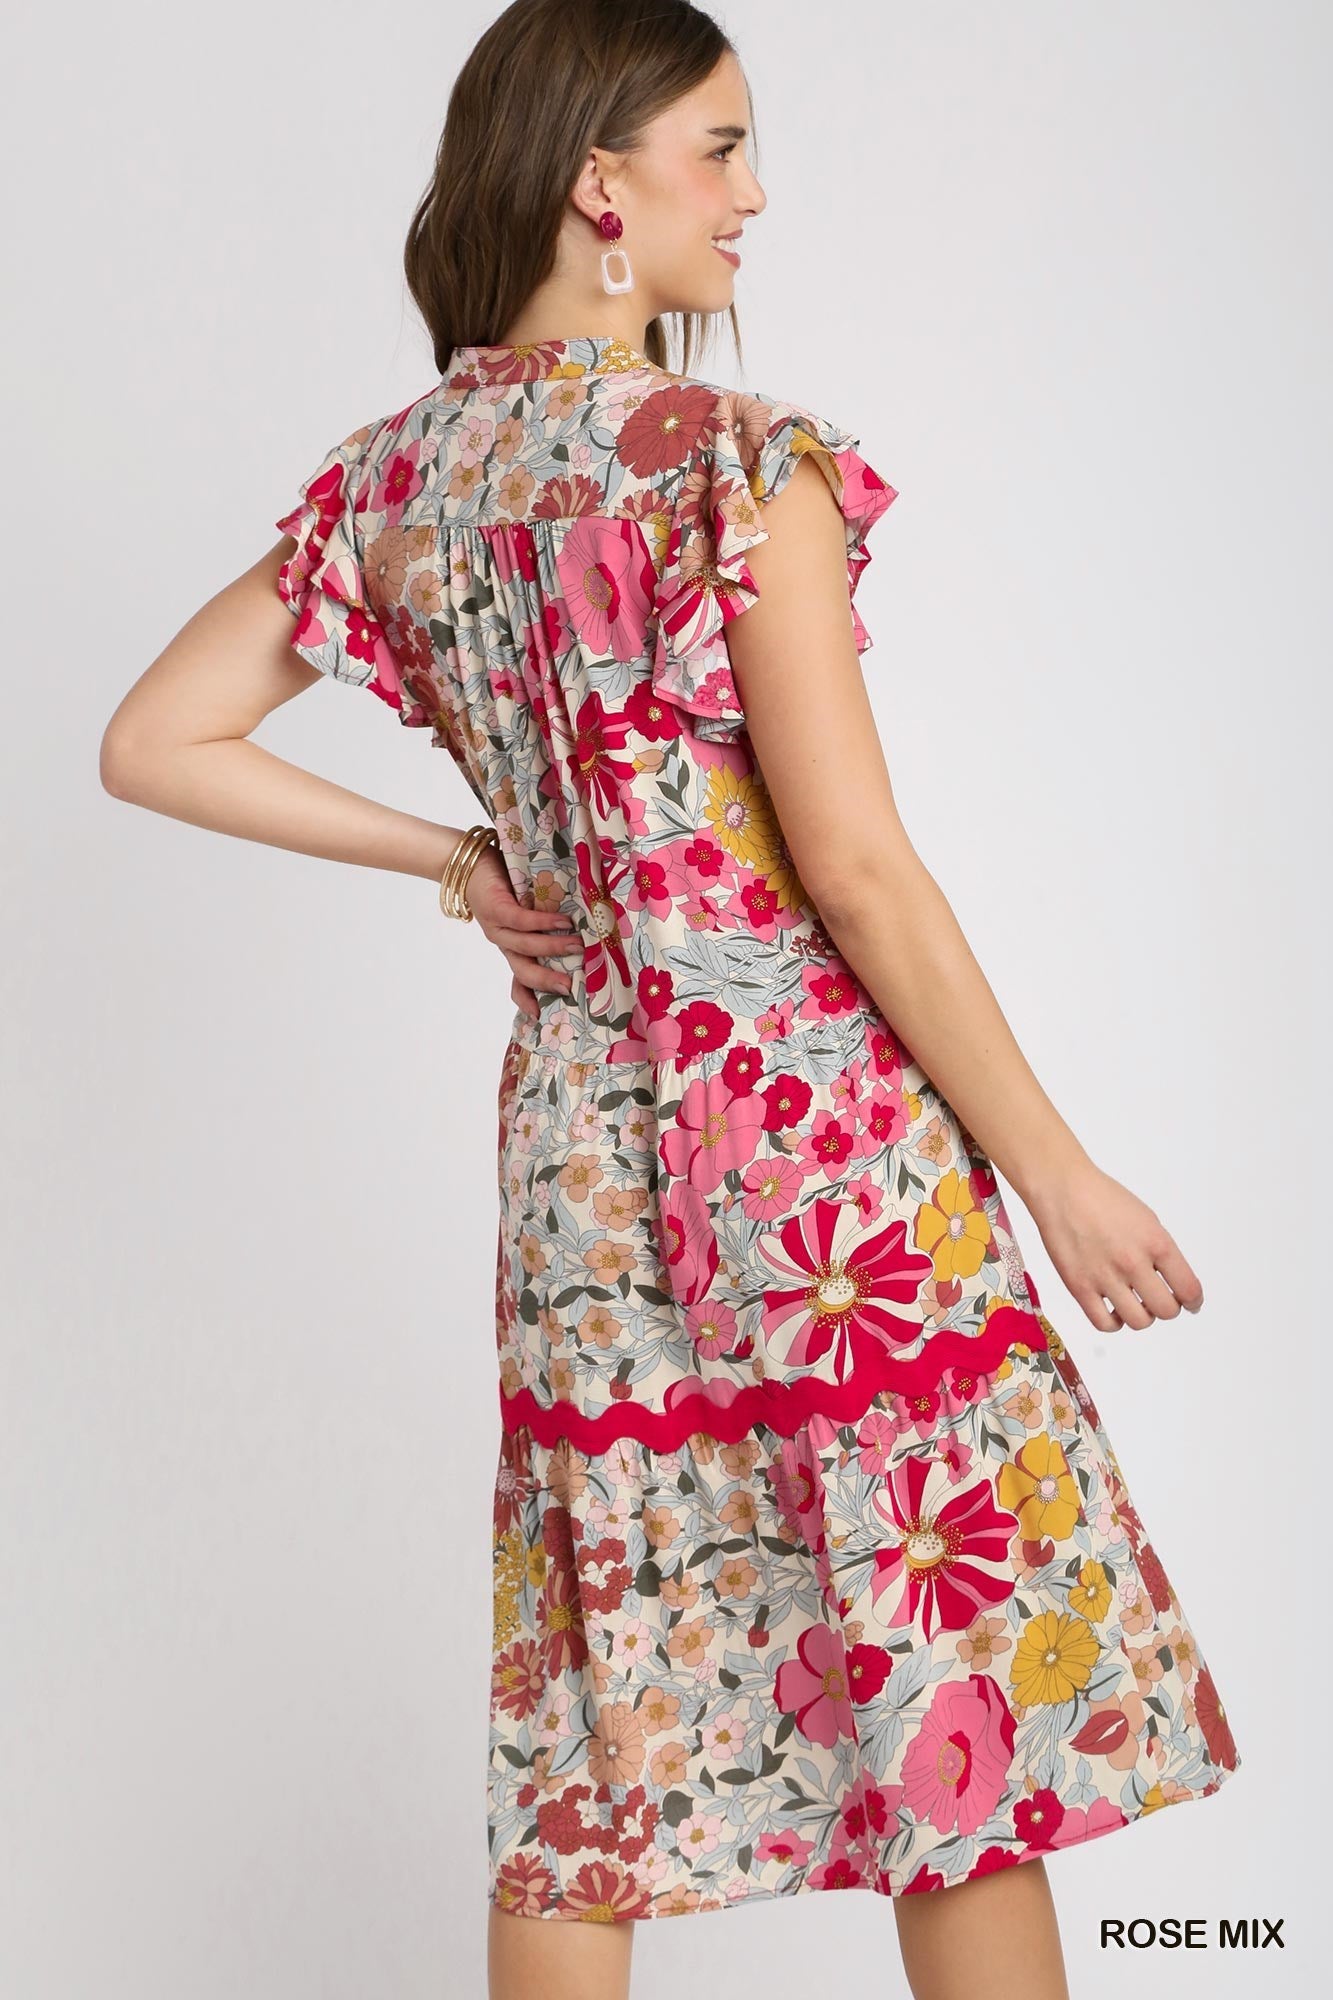 Multi Floral Umgee Dress with Split Neck, Short Ruffle Sleeves and Ric Rac Trim R0882